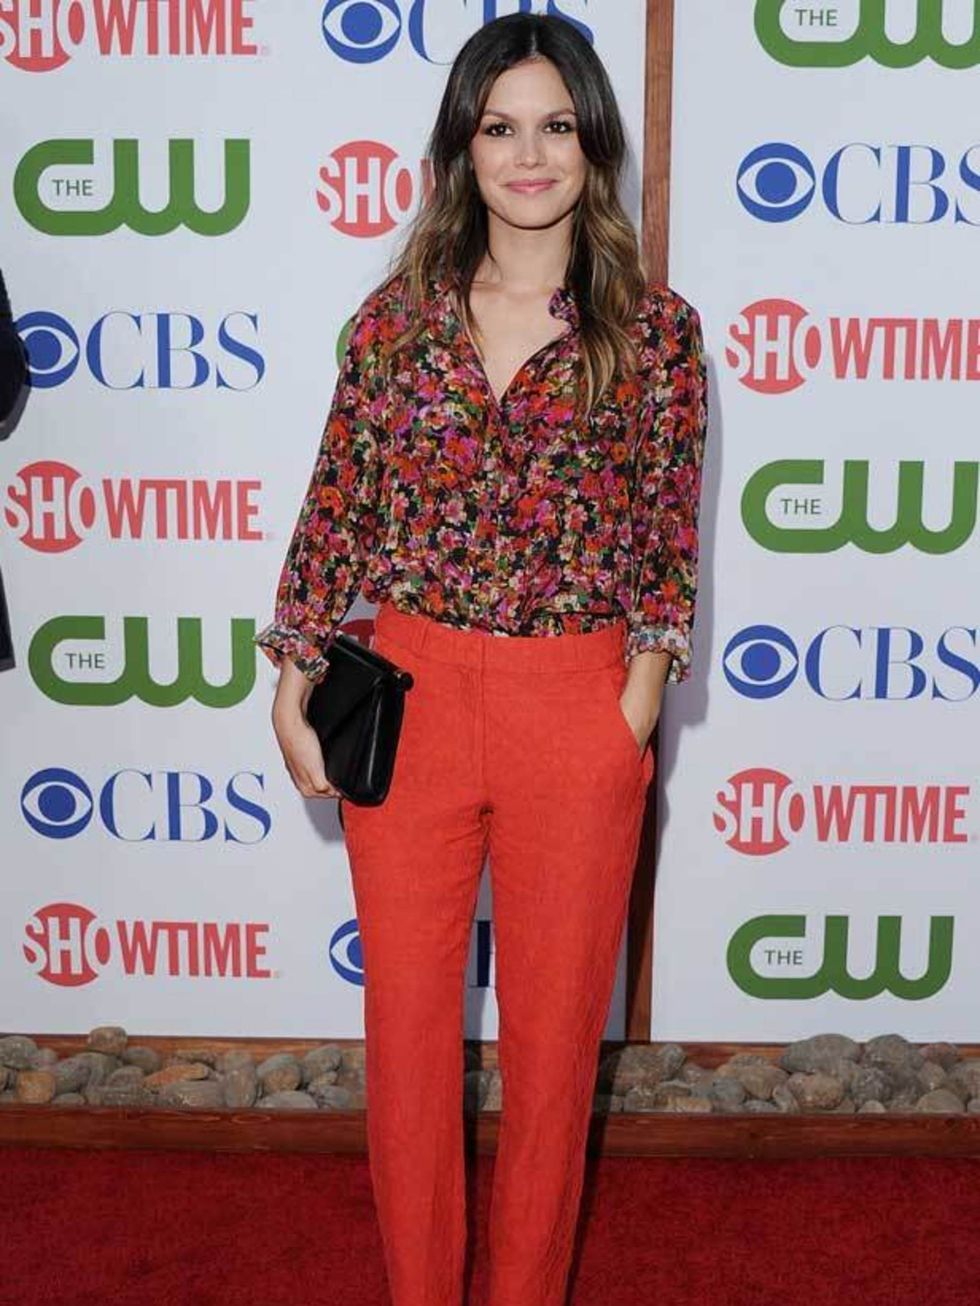 <p><a href="http://www.elleuk.com/starstyle/style-files/(section)/Rachel-Bilson">Rachel Bilson</a> mixing feminine florals with tailored trousers and <a href="http://www.elleuk.com/fashion/editor-s-picks/leopard-print">leopard print</a> shoes</p>